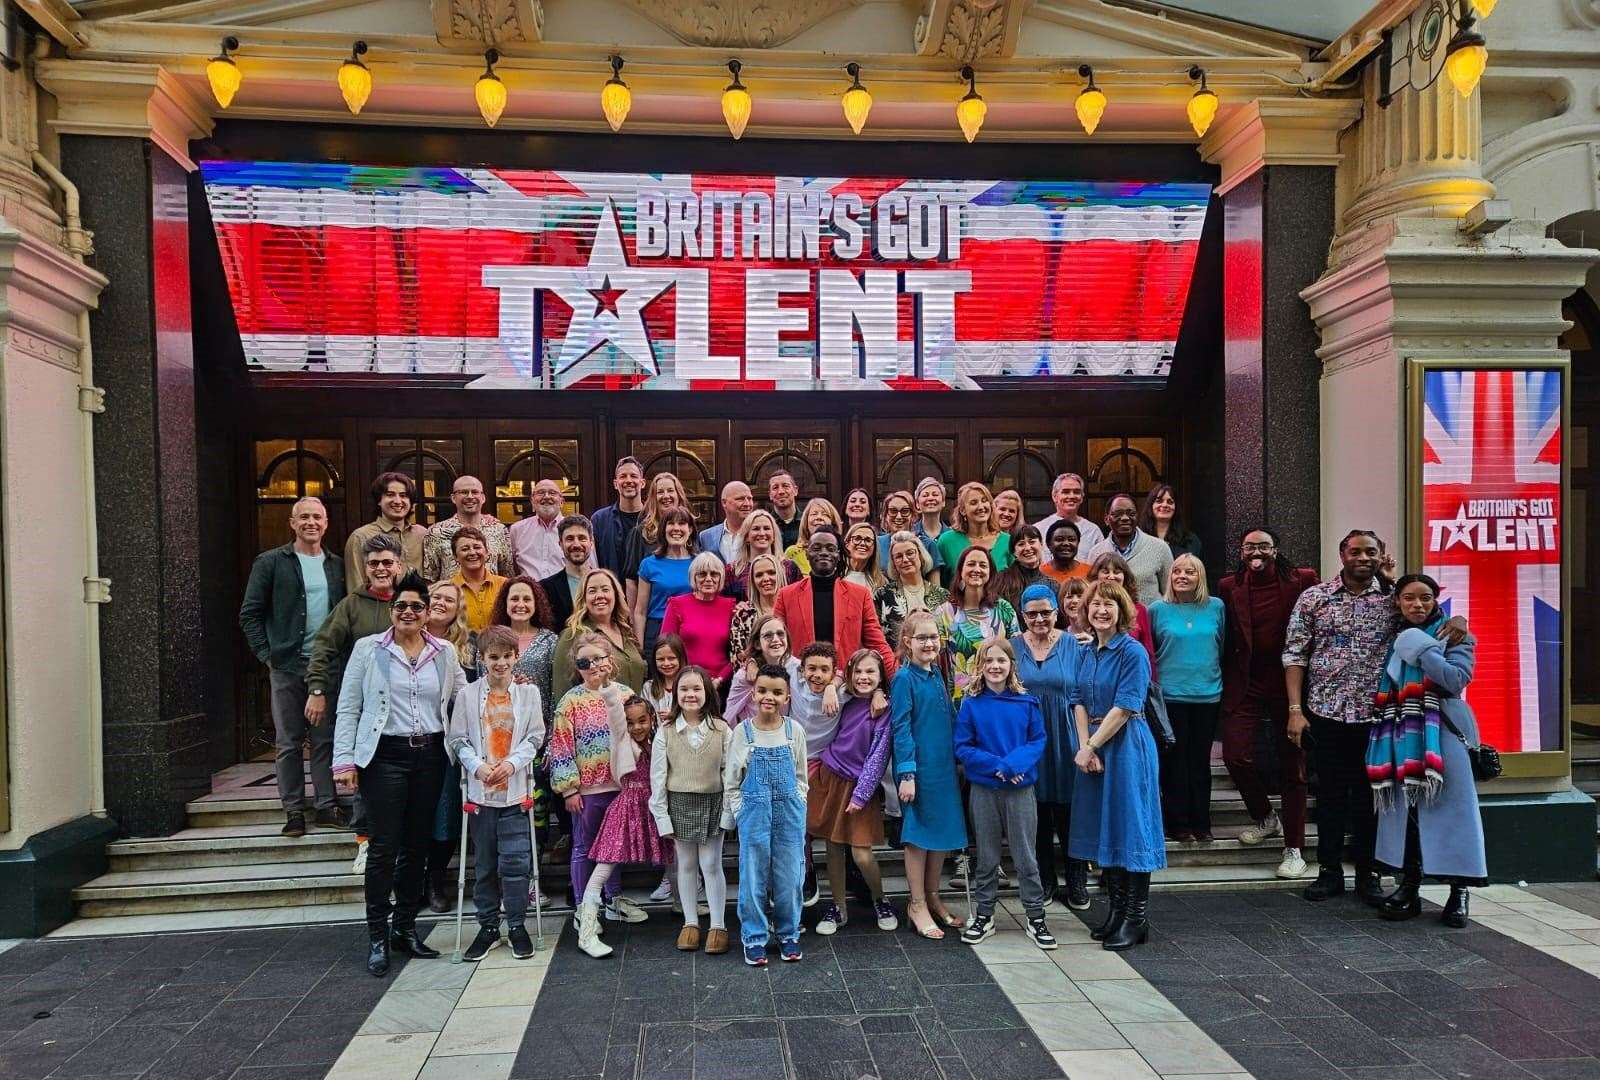 The choir outside the theatre after recording their BGT audition - Samuel is front left on crutches